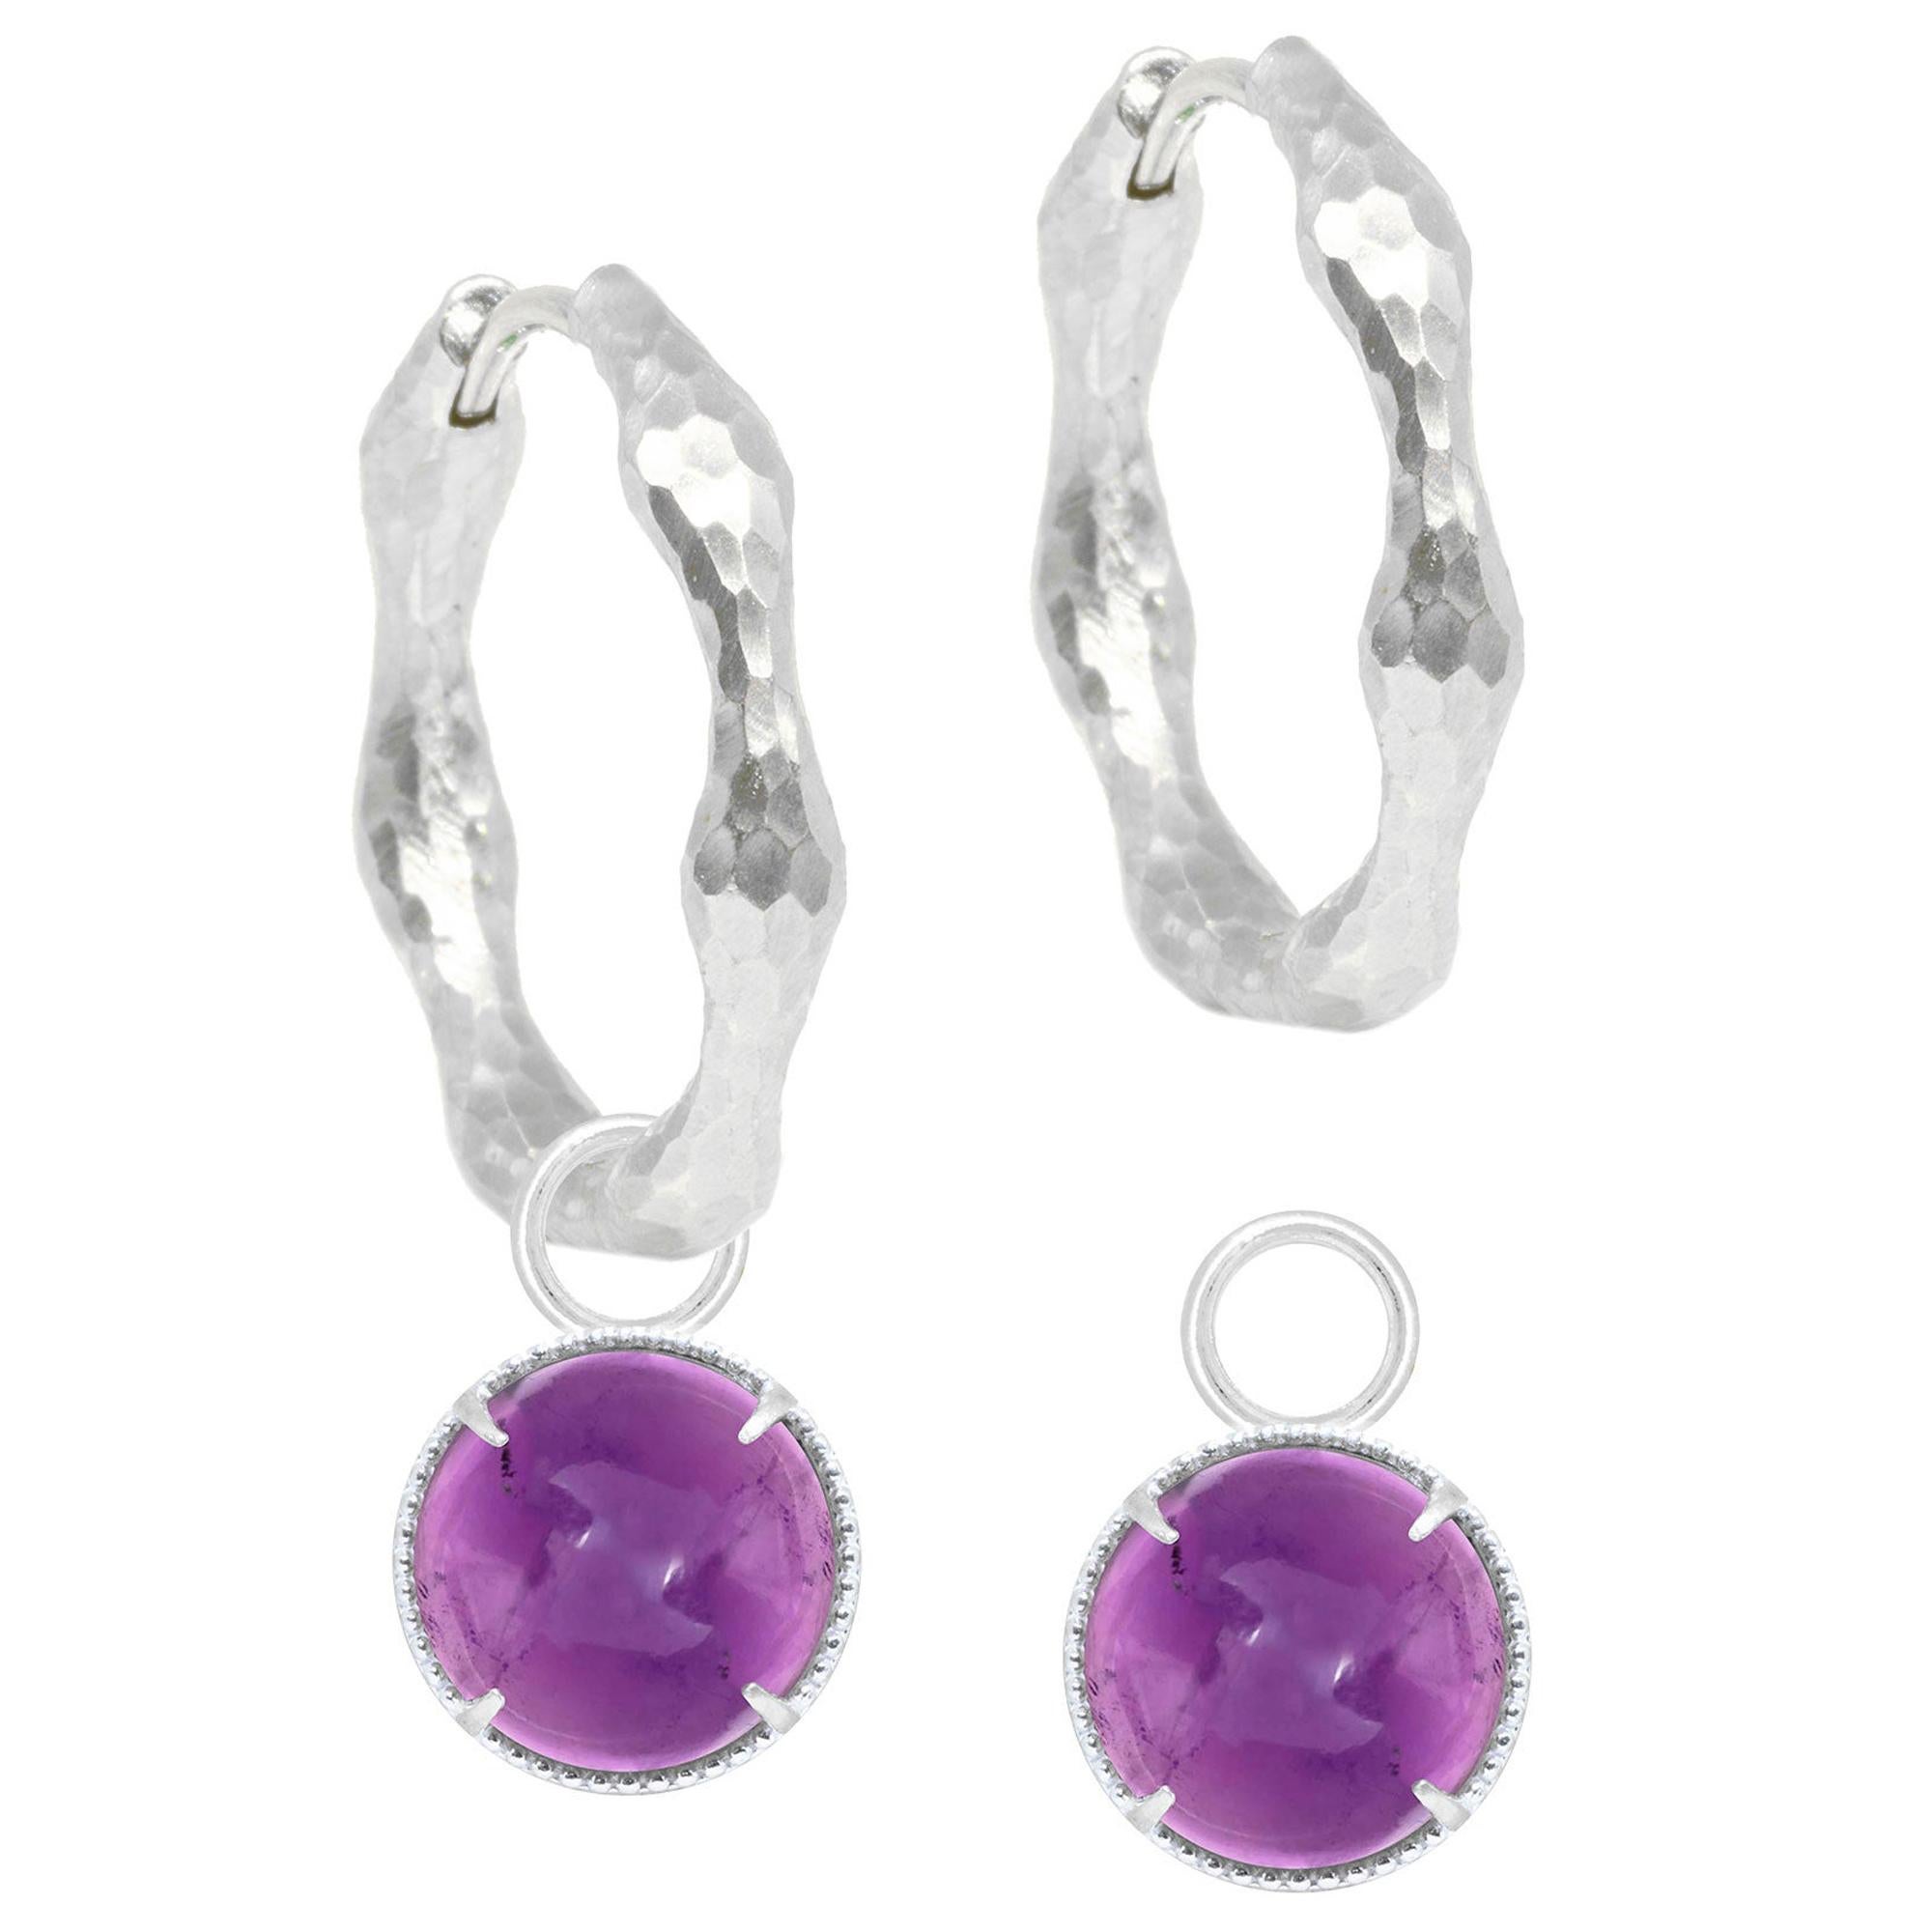 Vintage Lace Round Amethyst Silver Earring Charms